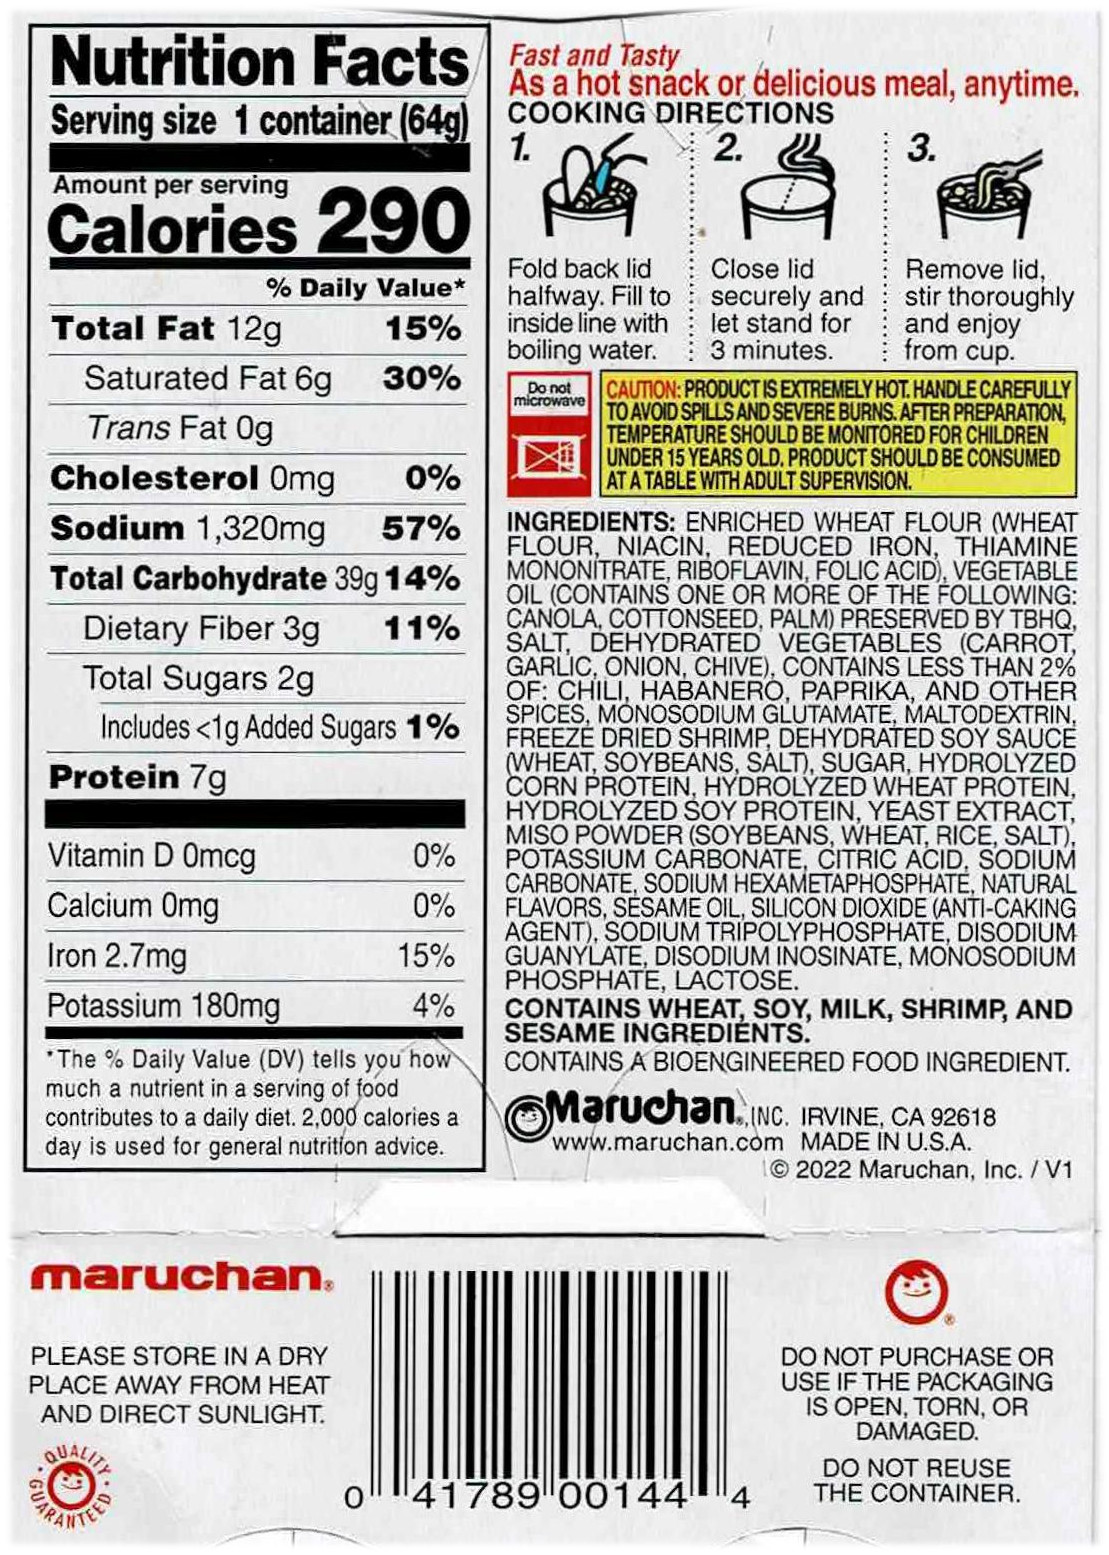 The ingredients and nutrition information of the Maruchan Hot & Spice Shrimp Ramen Noodle Soup.